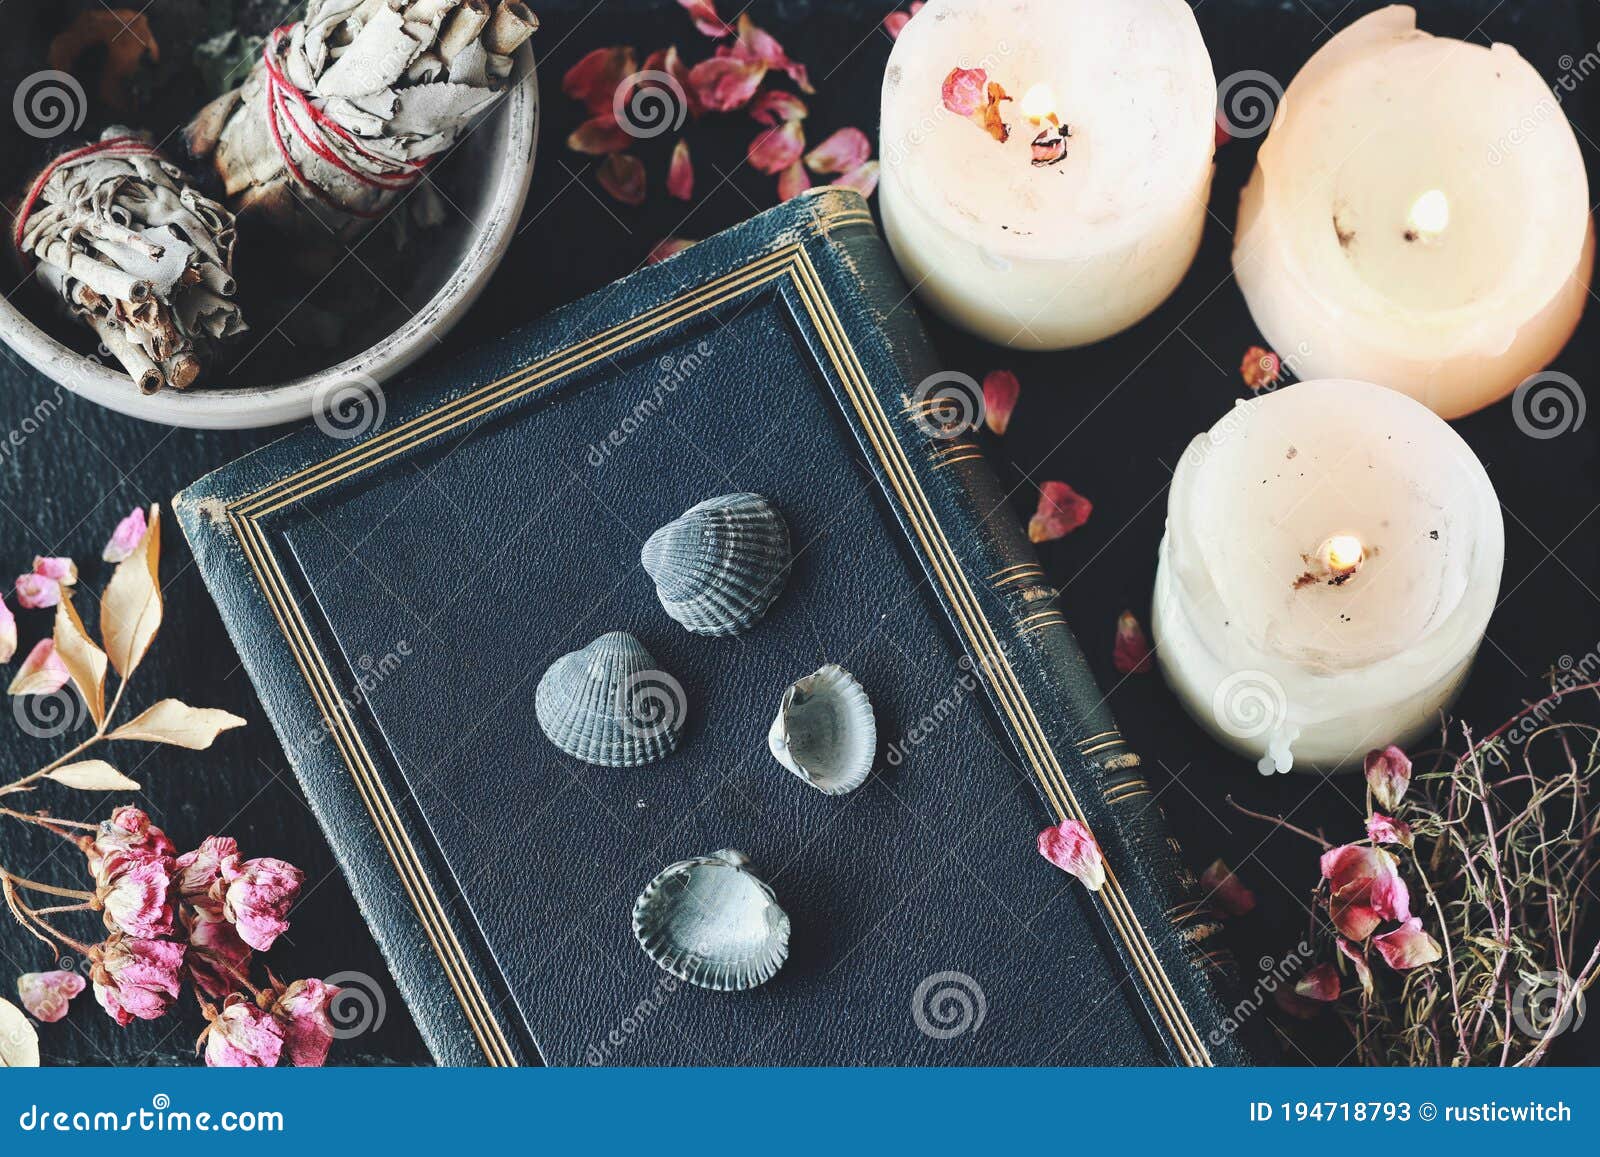 Divination Using Sea Shells in Hoodoo Witchcraft Practice on